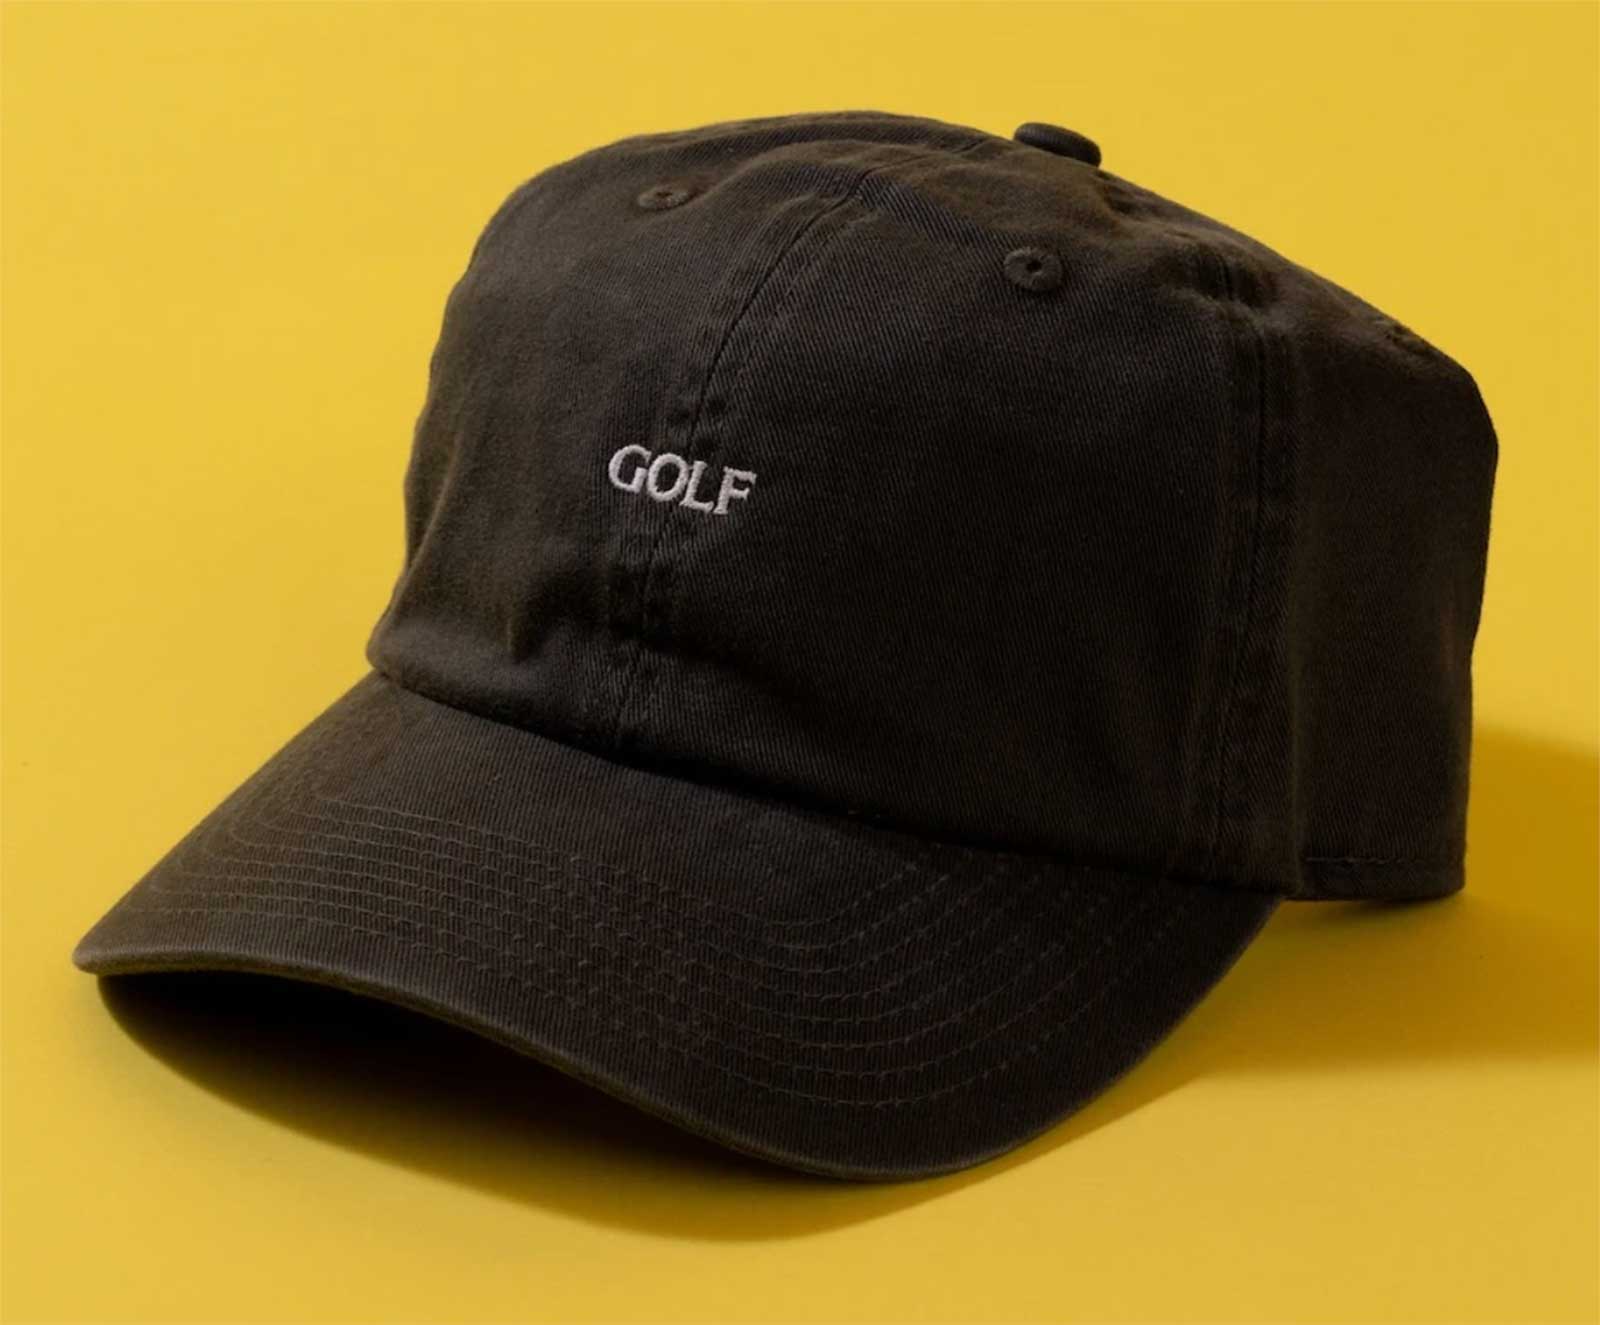 GOLF's relaxed fit hat